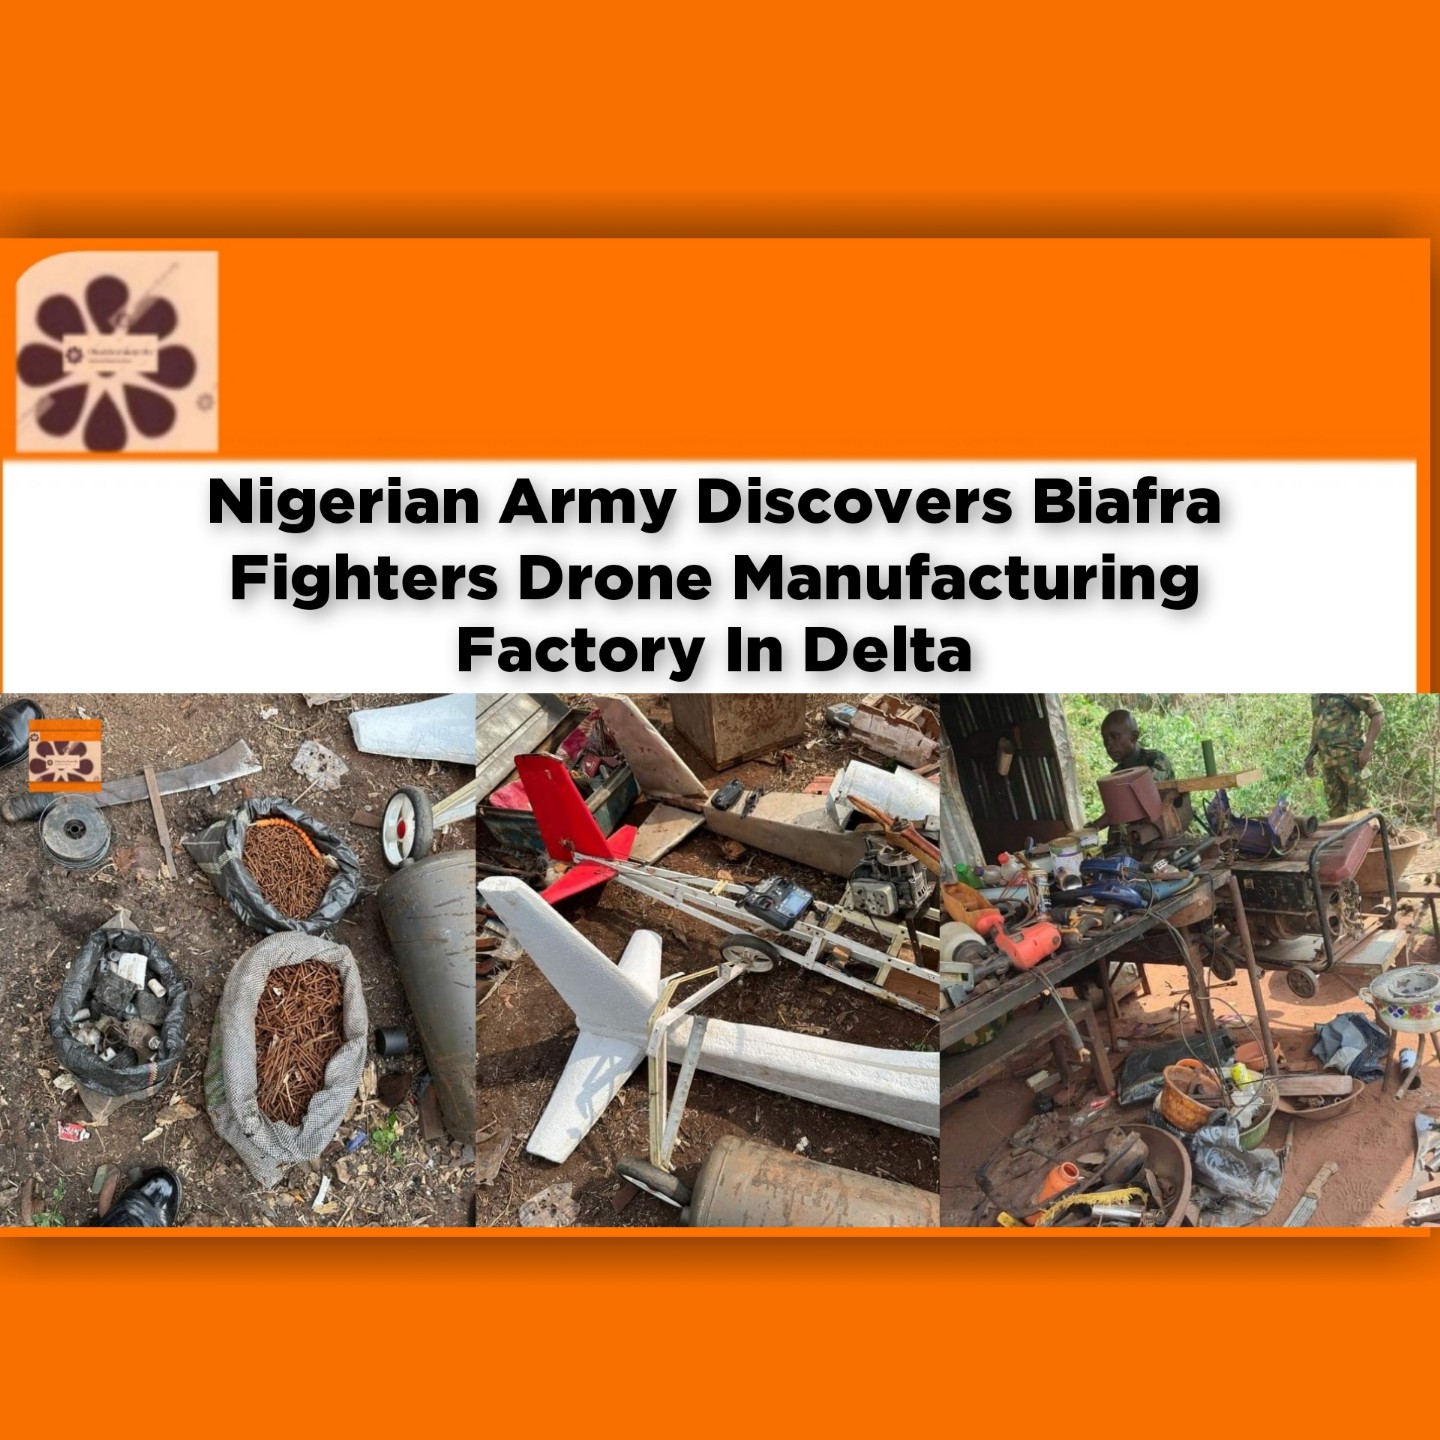 Nigerian Army Discovers Biafra Fighters Drone Manufacturing Factory In Delta ~ OsazuwaAkonedo #army #Biafra #Delta #Drones #ESN #ipob #Nigeria